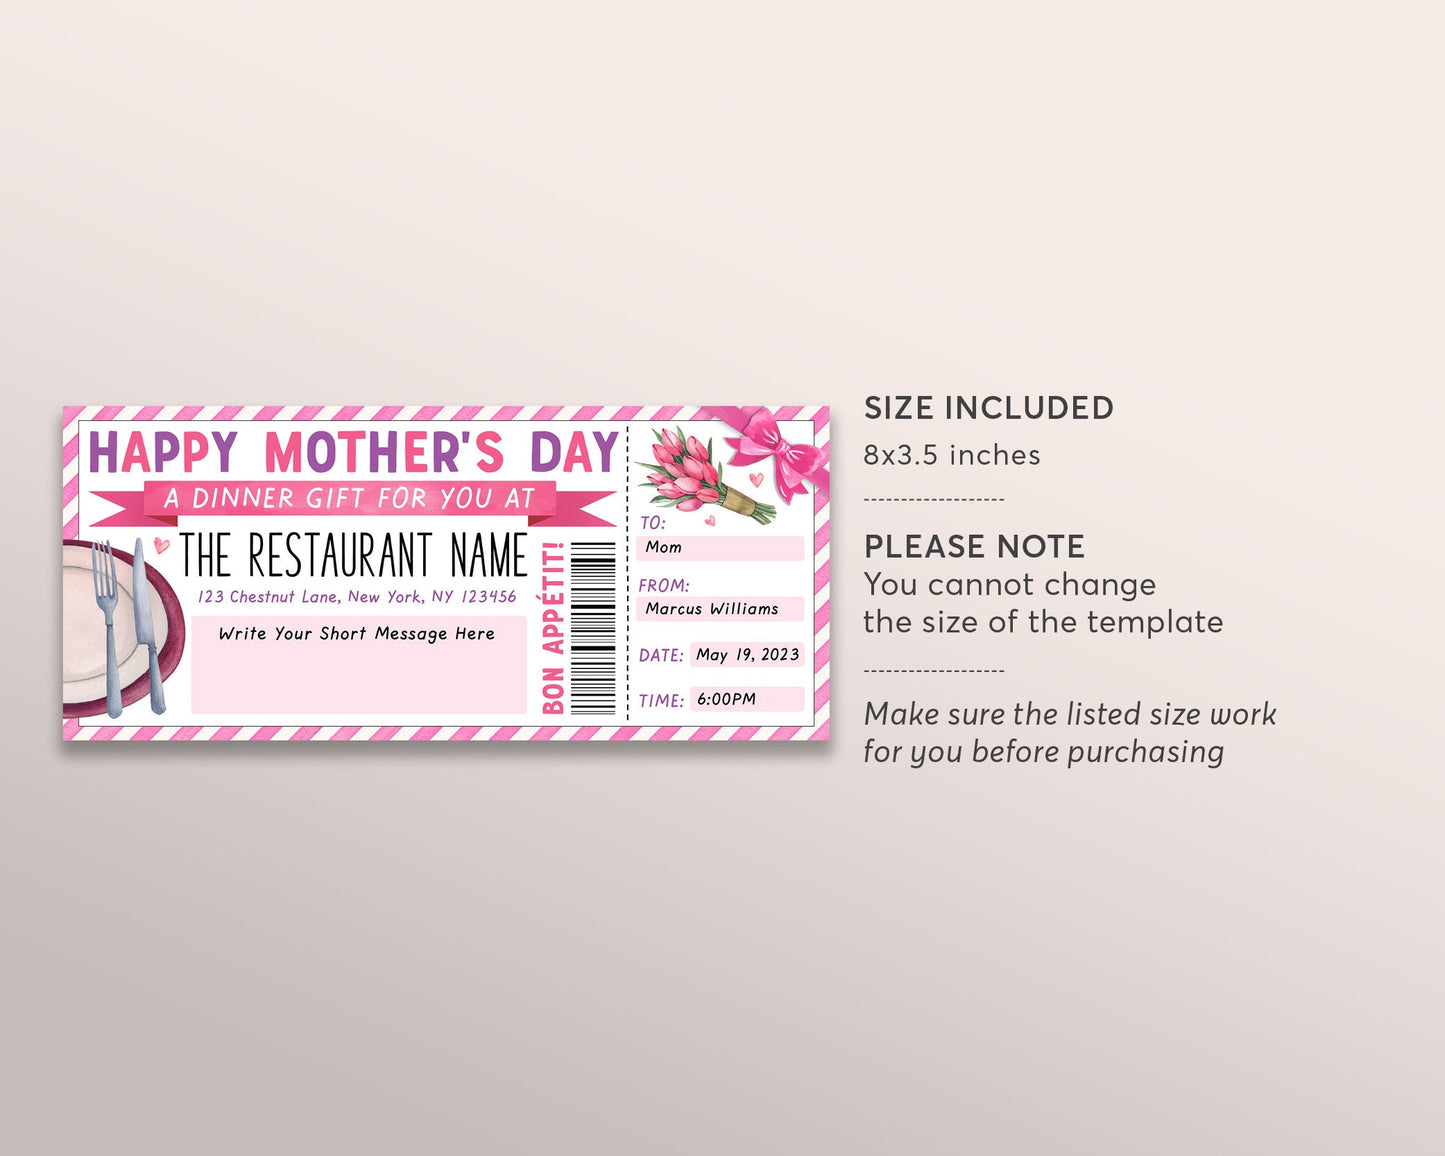 Mothers Day Restaurant Gift Voucher Editable Template, Surprise Dinner Gift Certificate Invite For Mom, Dining Night Out Coupon Reveal DIY